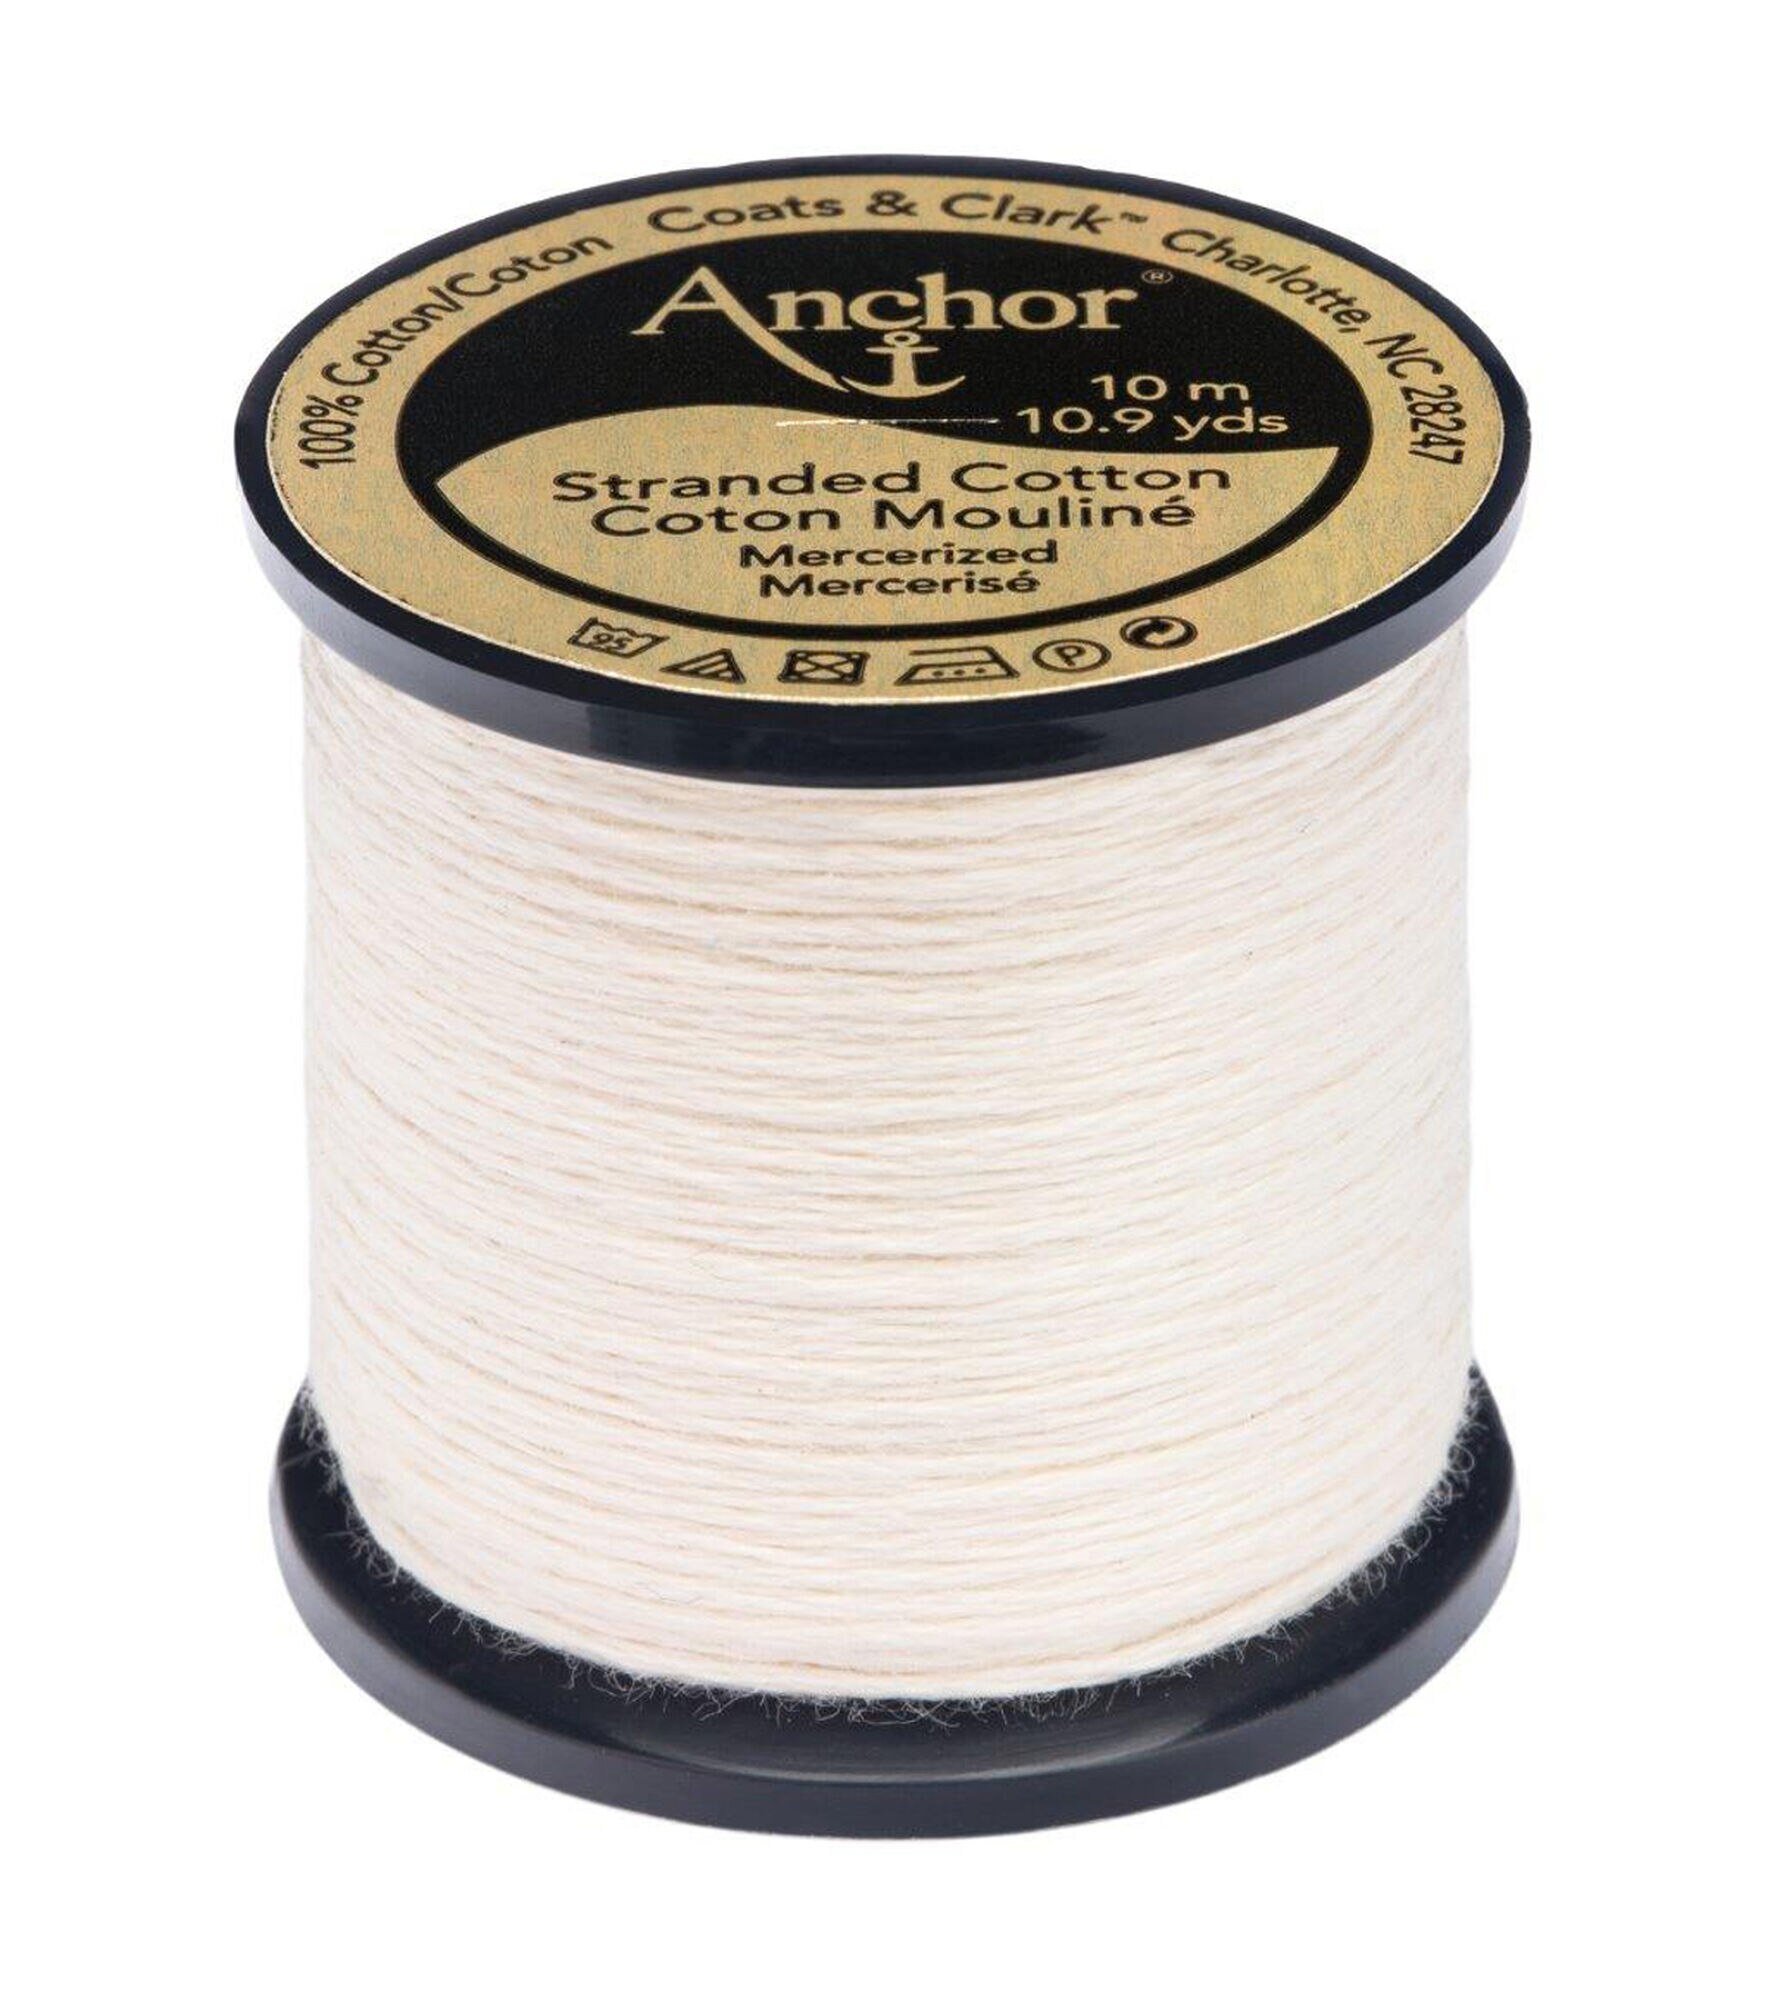 Anchor Cotton 10.9yd Neutral Cotton Embroidery Floss, 926 Ecru Very Light, hi-res